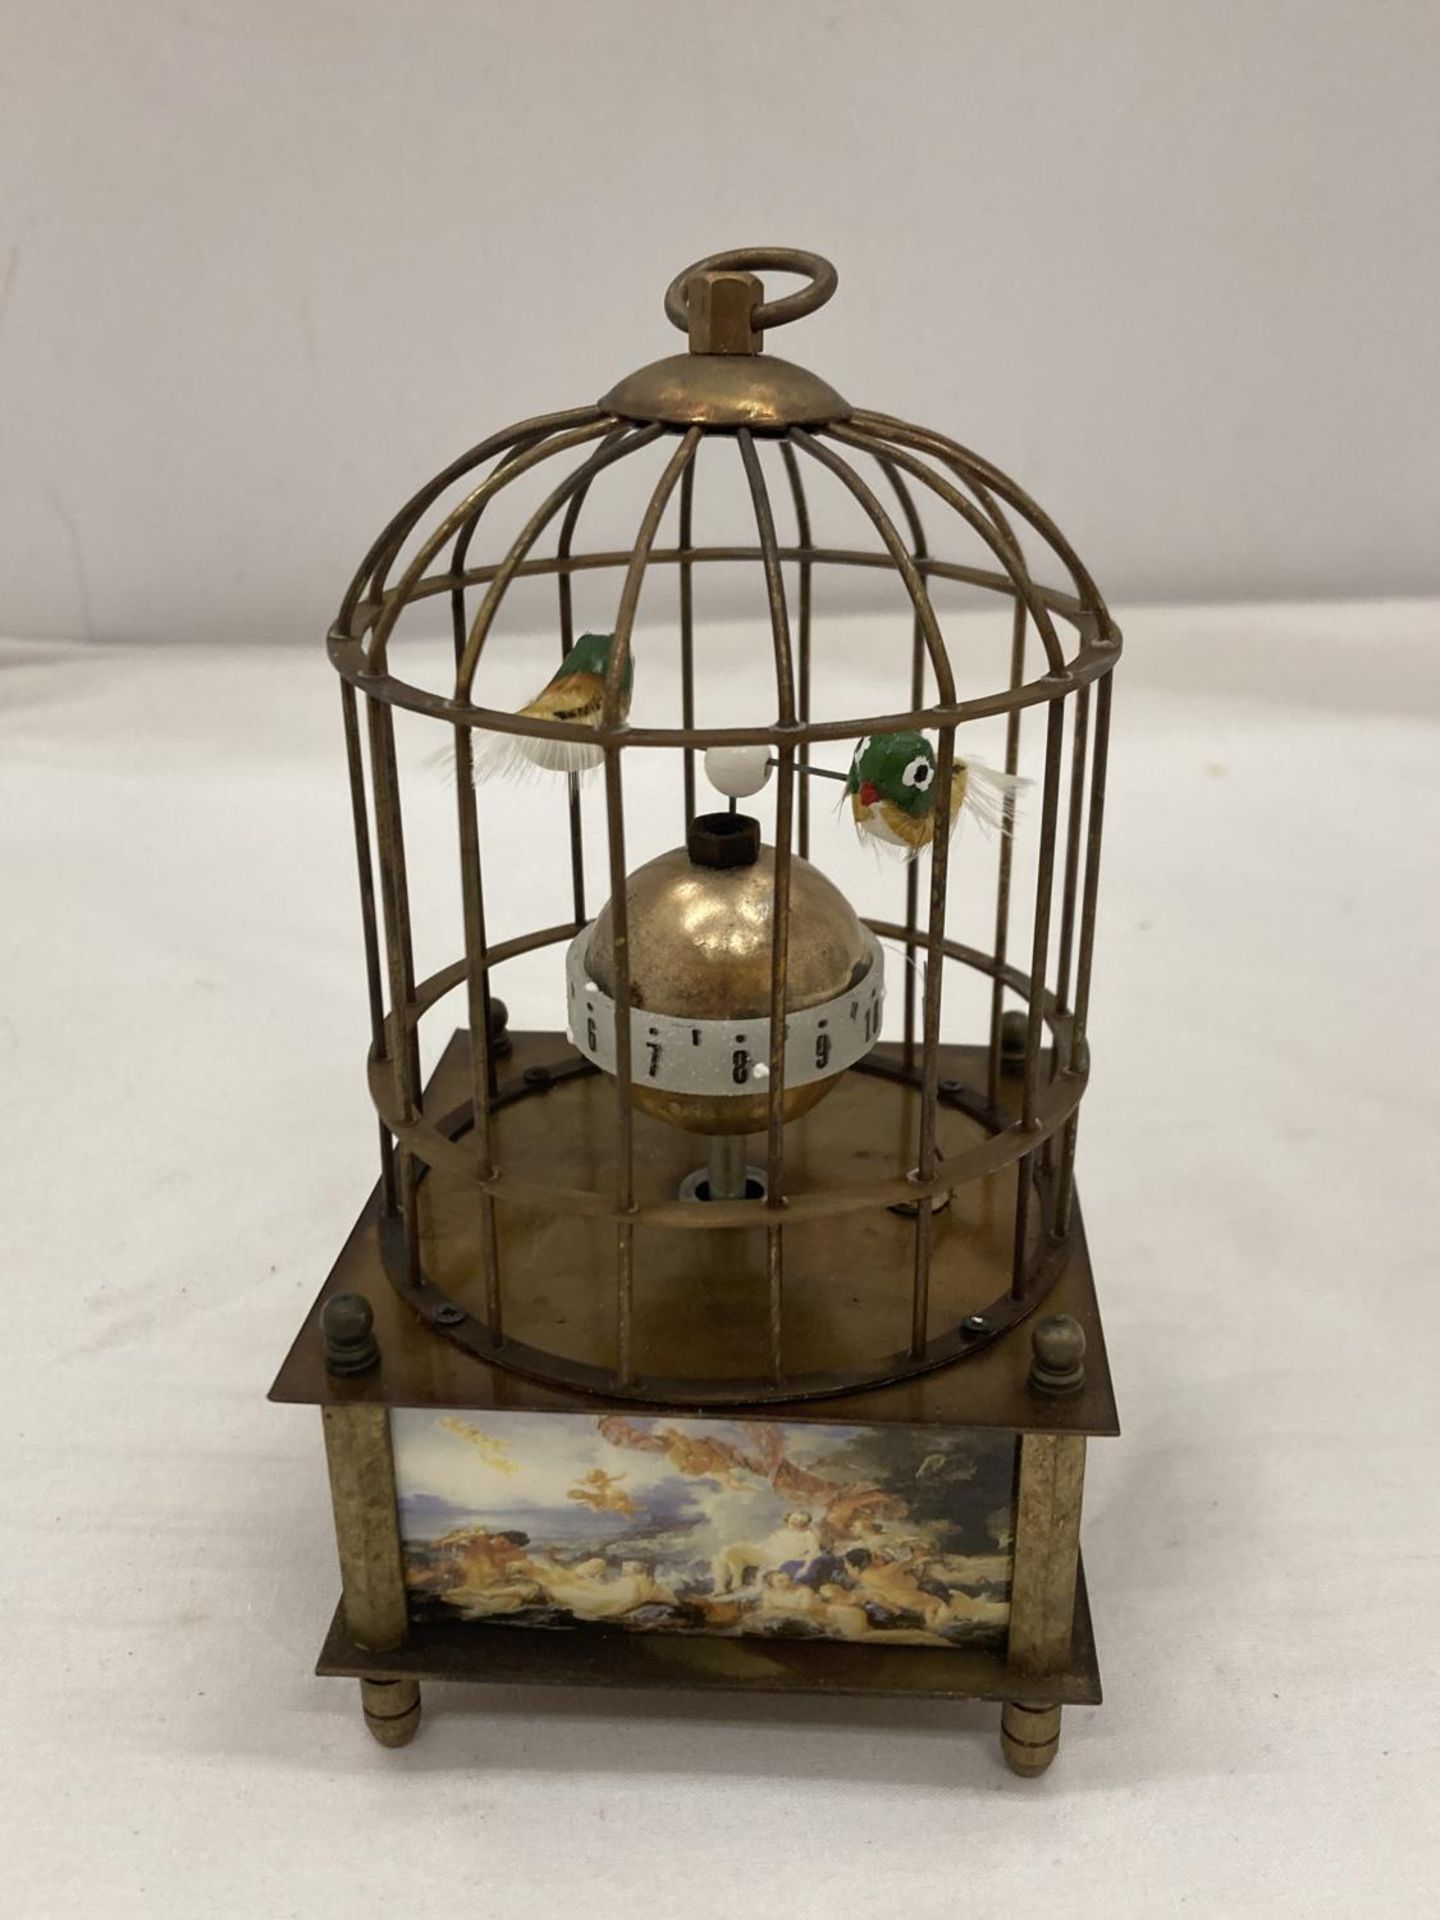 A BRASS MECHANICAL BIRD CAGE CLOCK SEEN WORKING BUT NO WARRANTY - Image 2 of 4